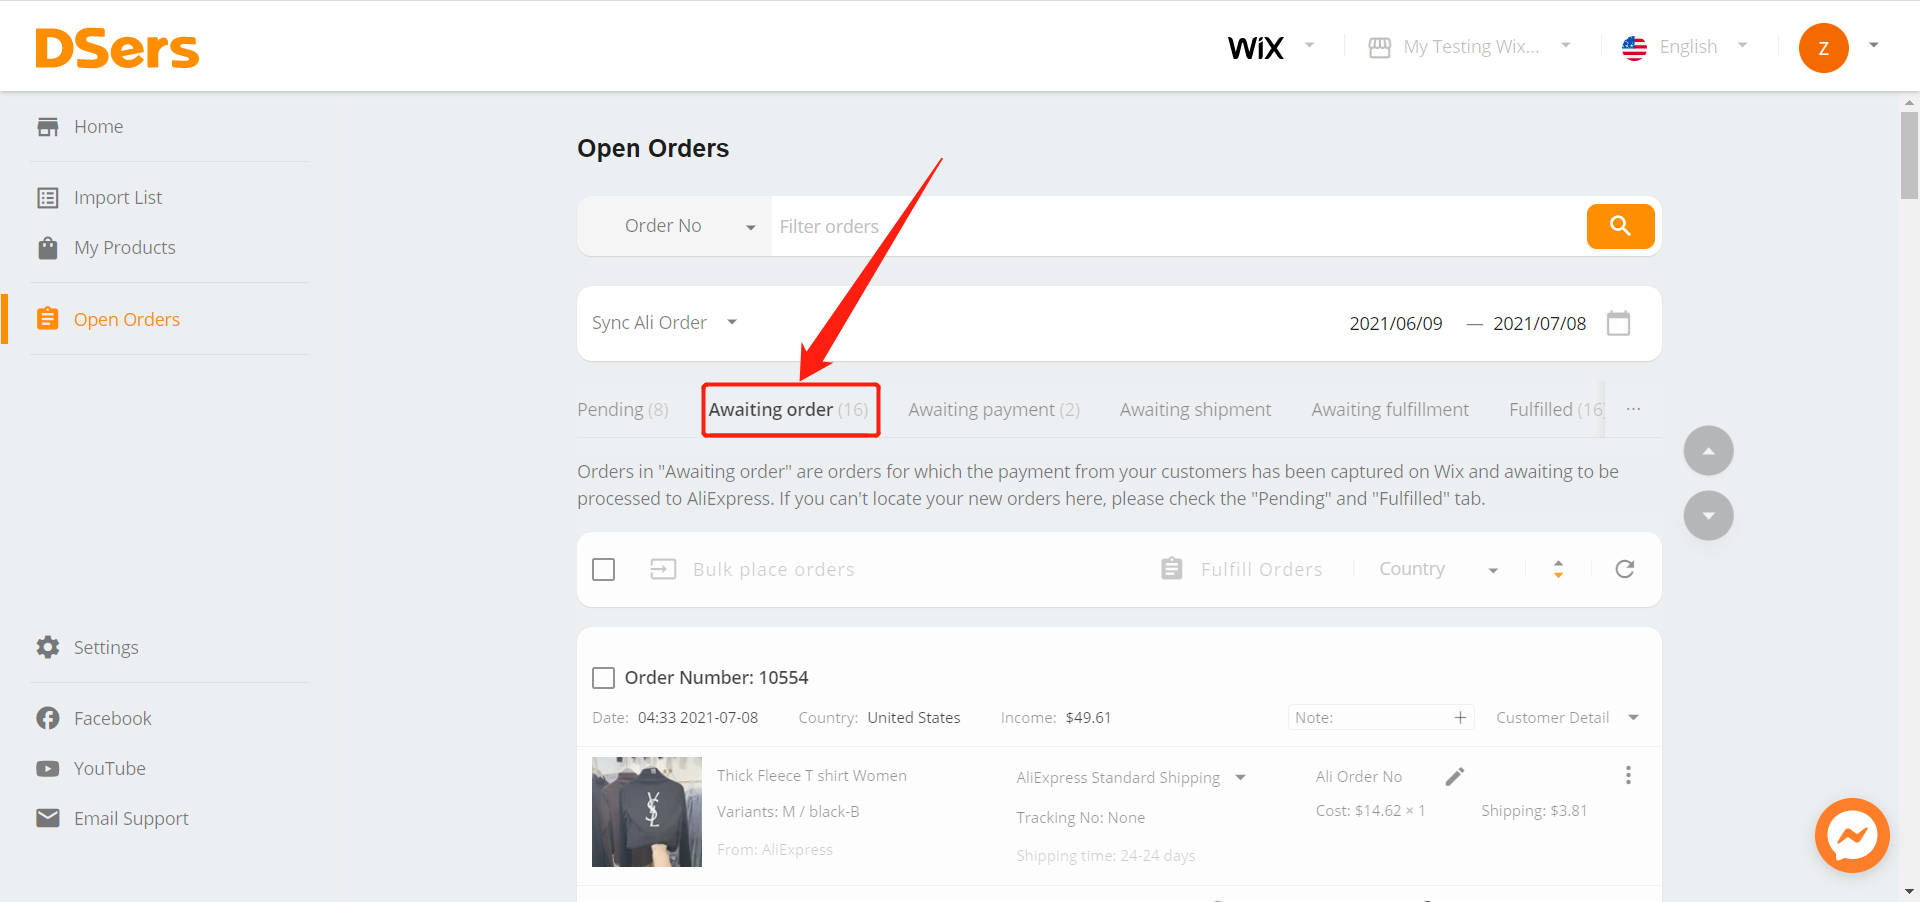 Pending orders introduction for Wix DSers - Awaiting order - Wix DSers